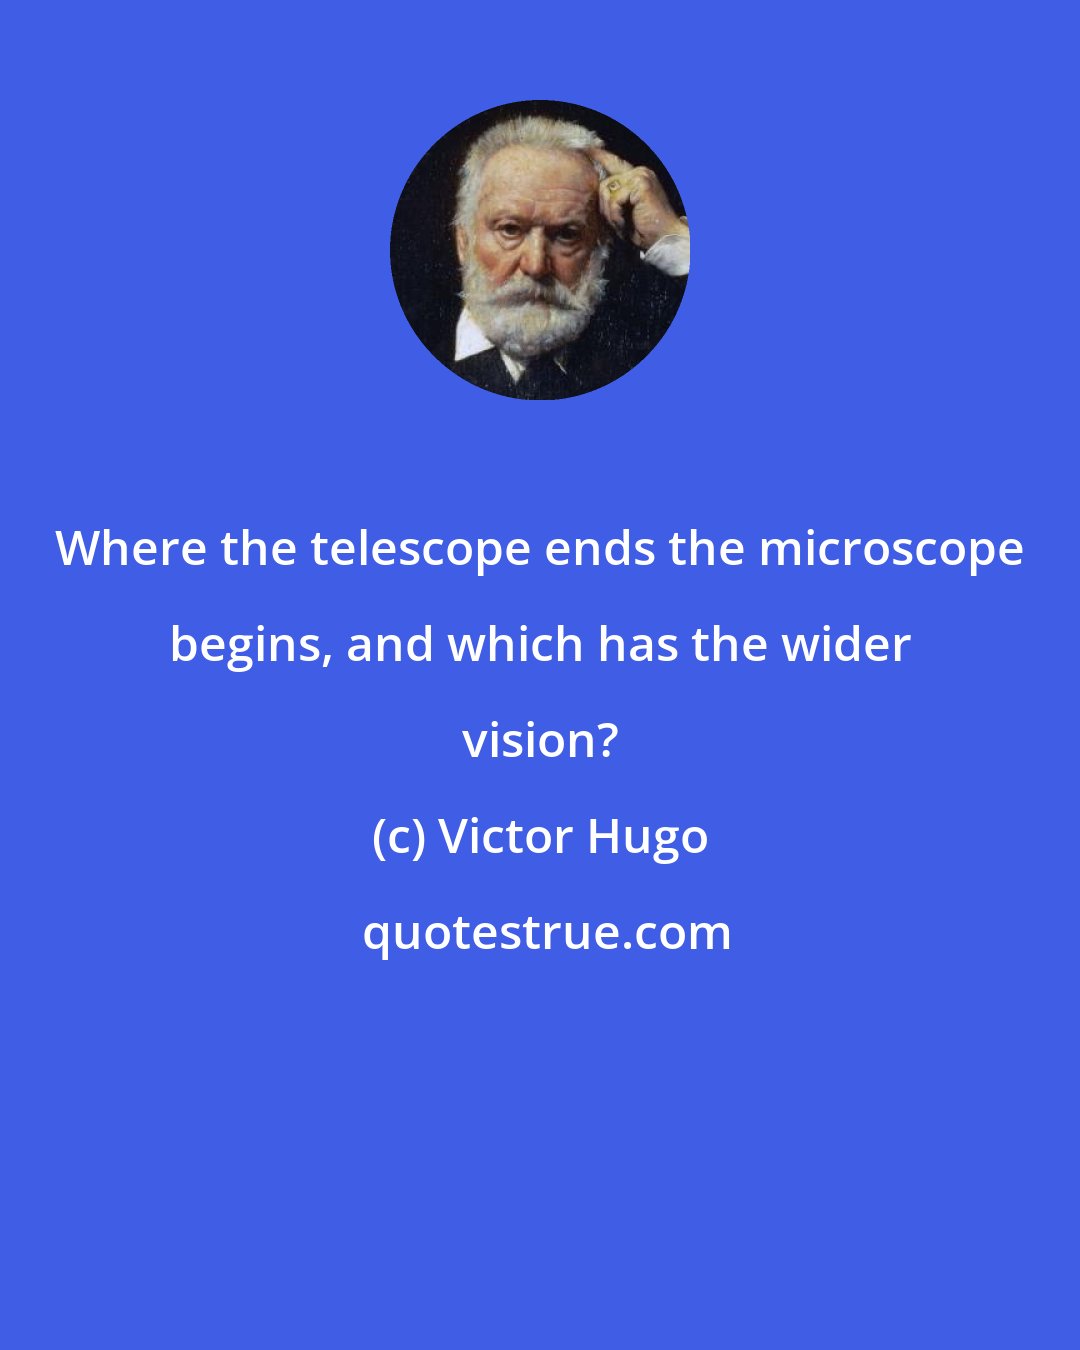 Victor Hugo: Where the telescope ends the microscope begins, and which has the wider vision?